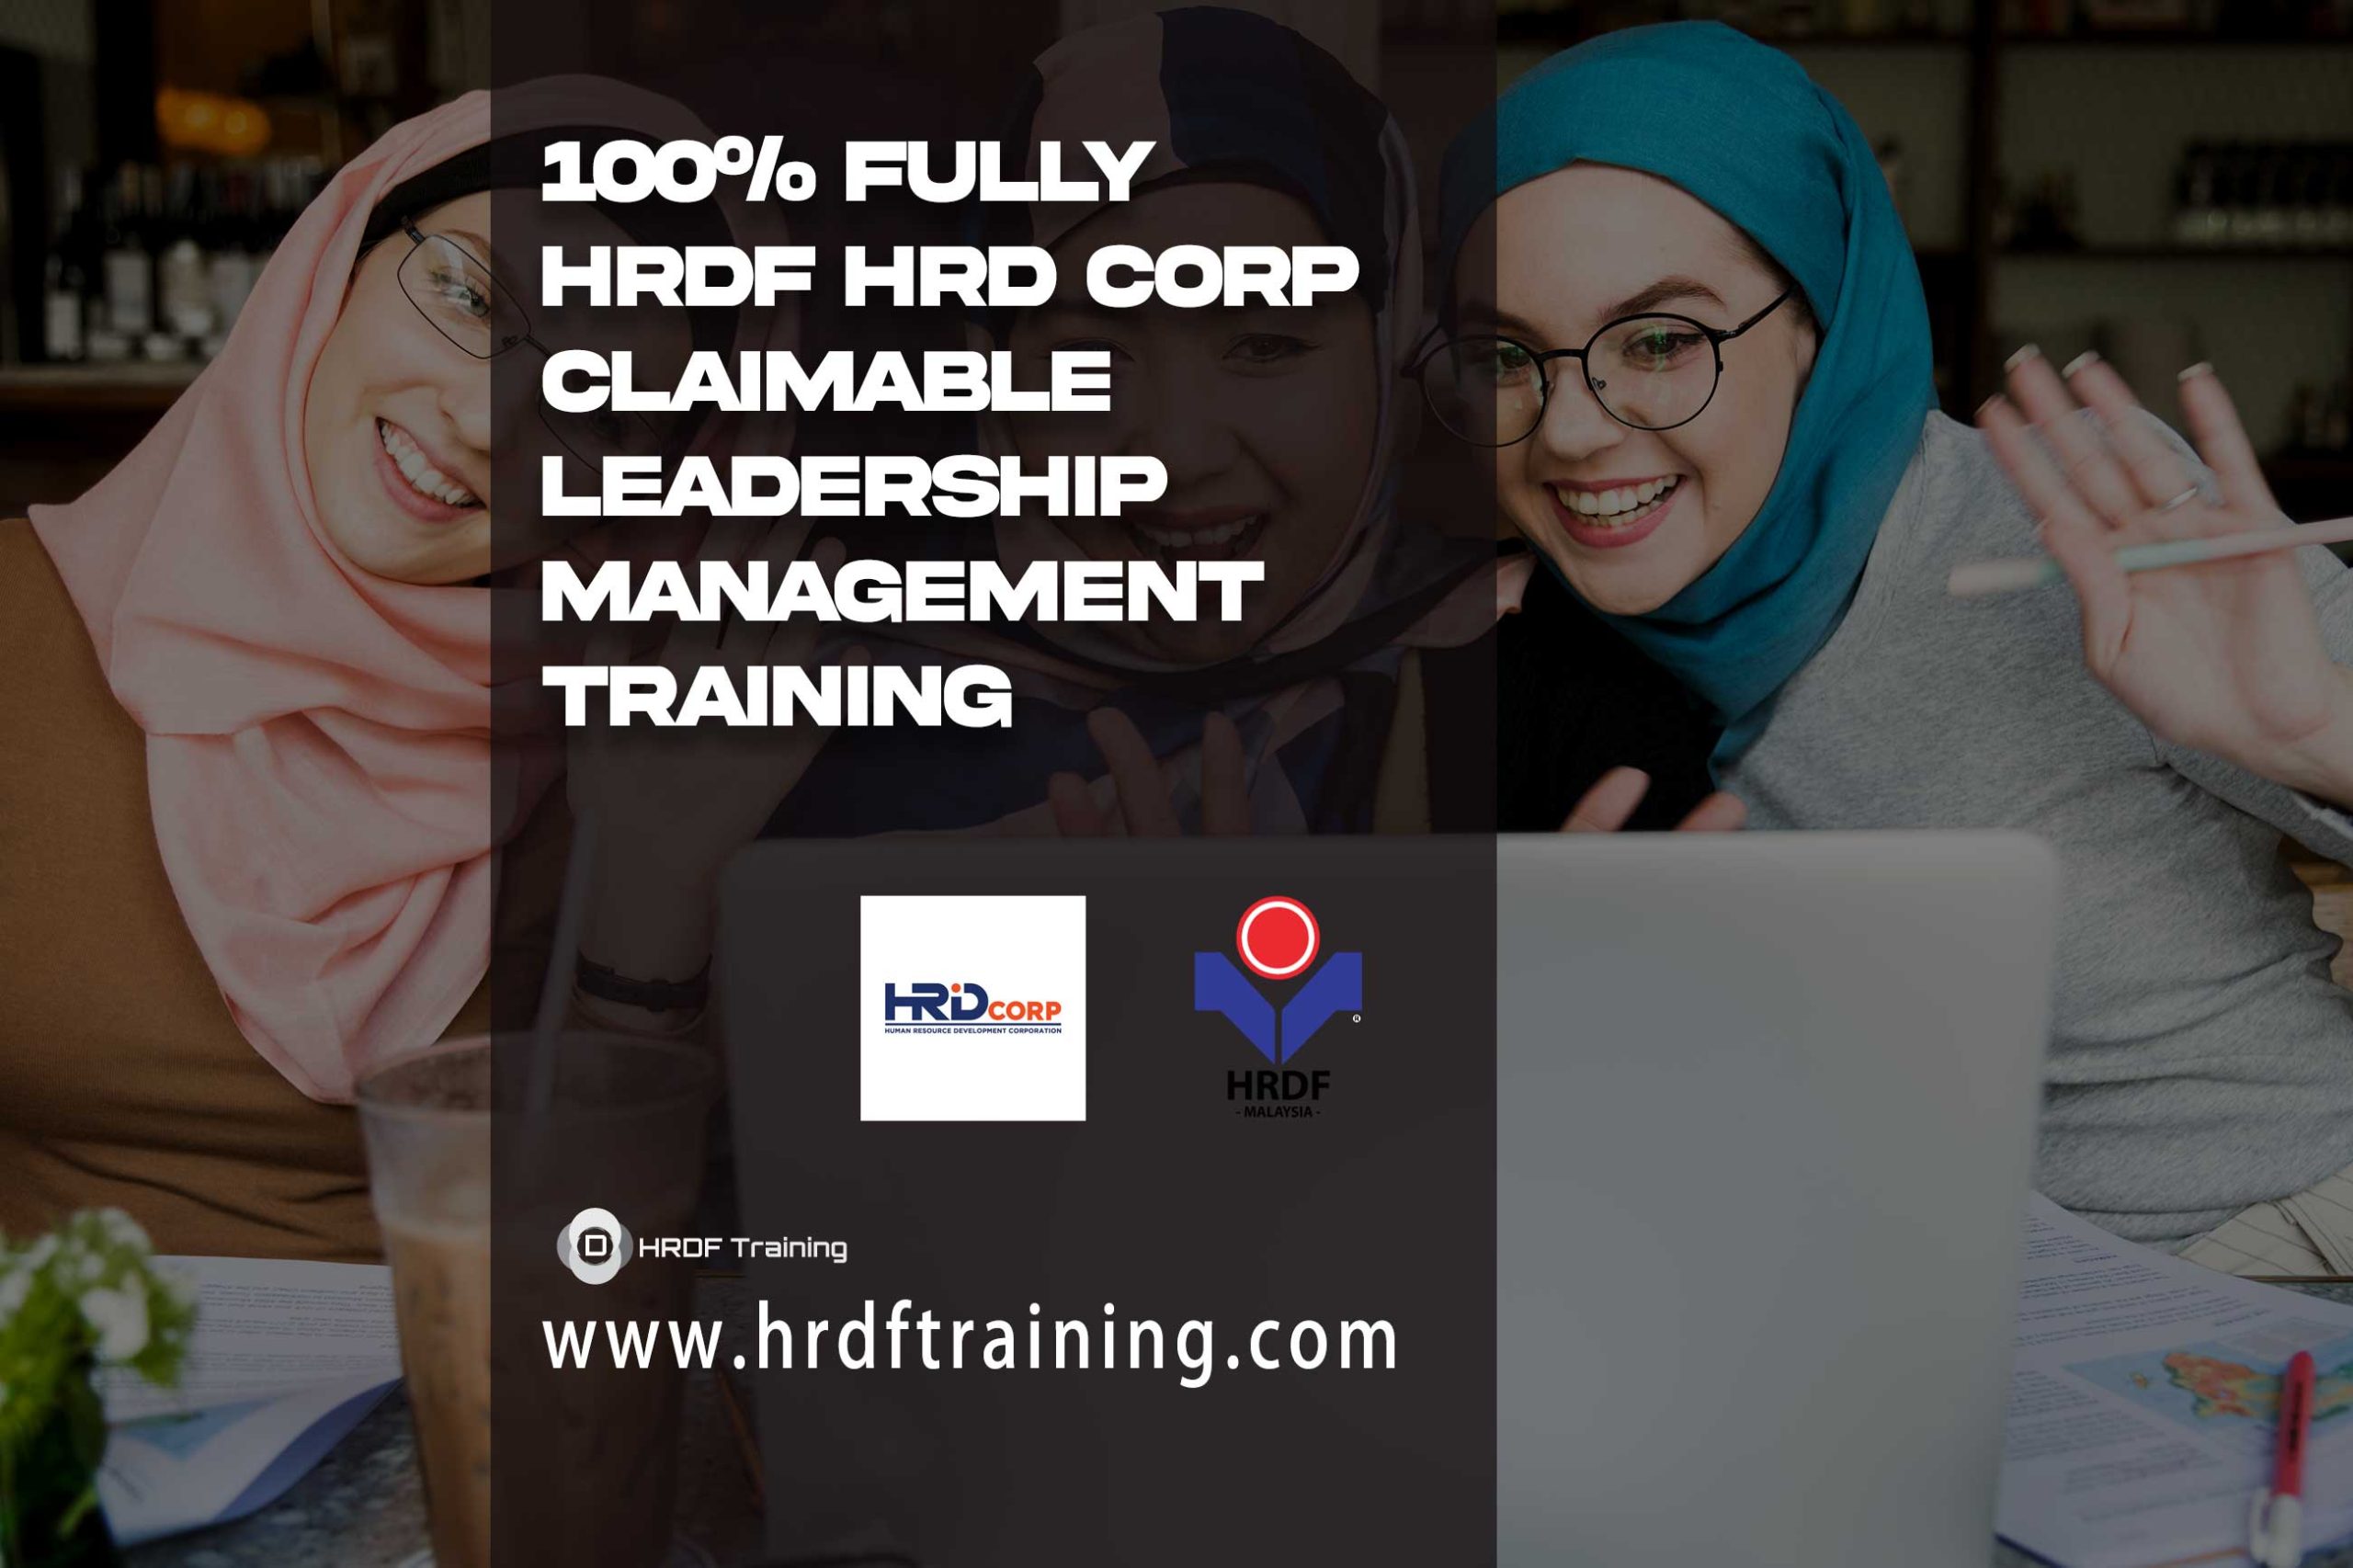 HRDF-HRD-Corp-Claimable-Leadership-Management-Training